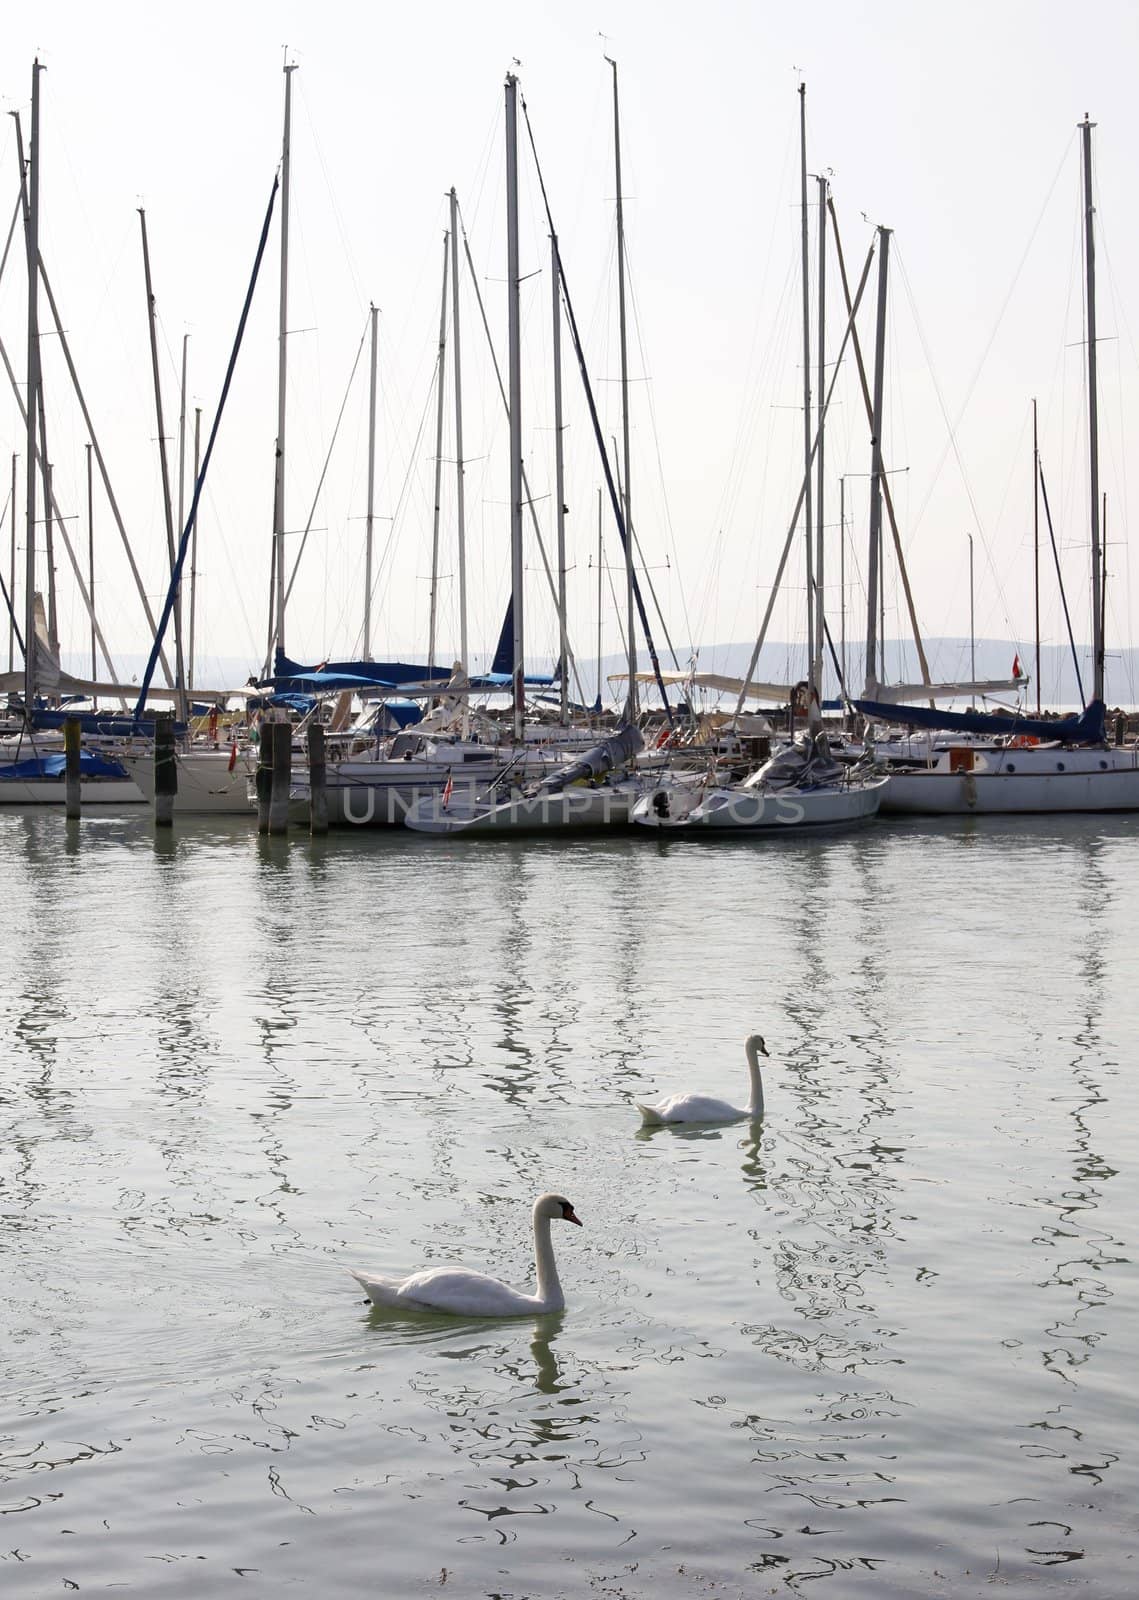 Two swans swimming in the marina